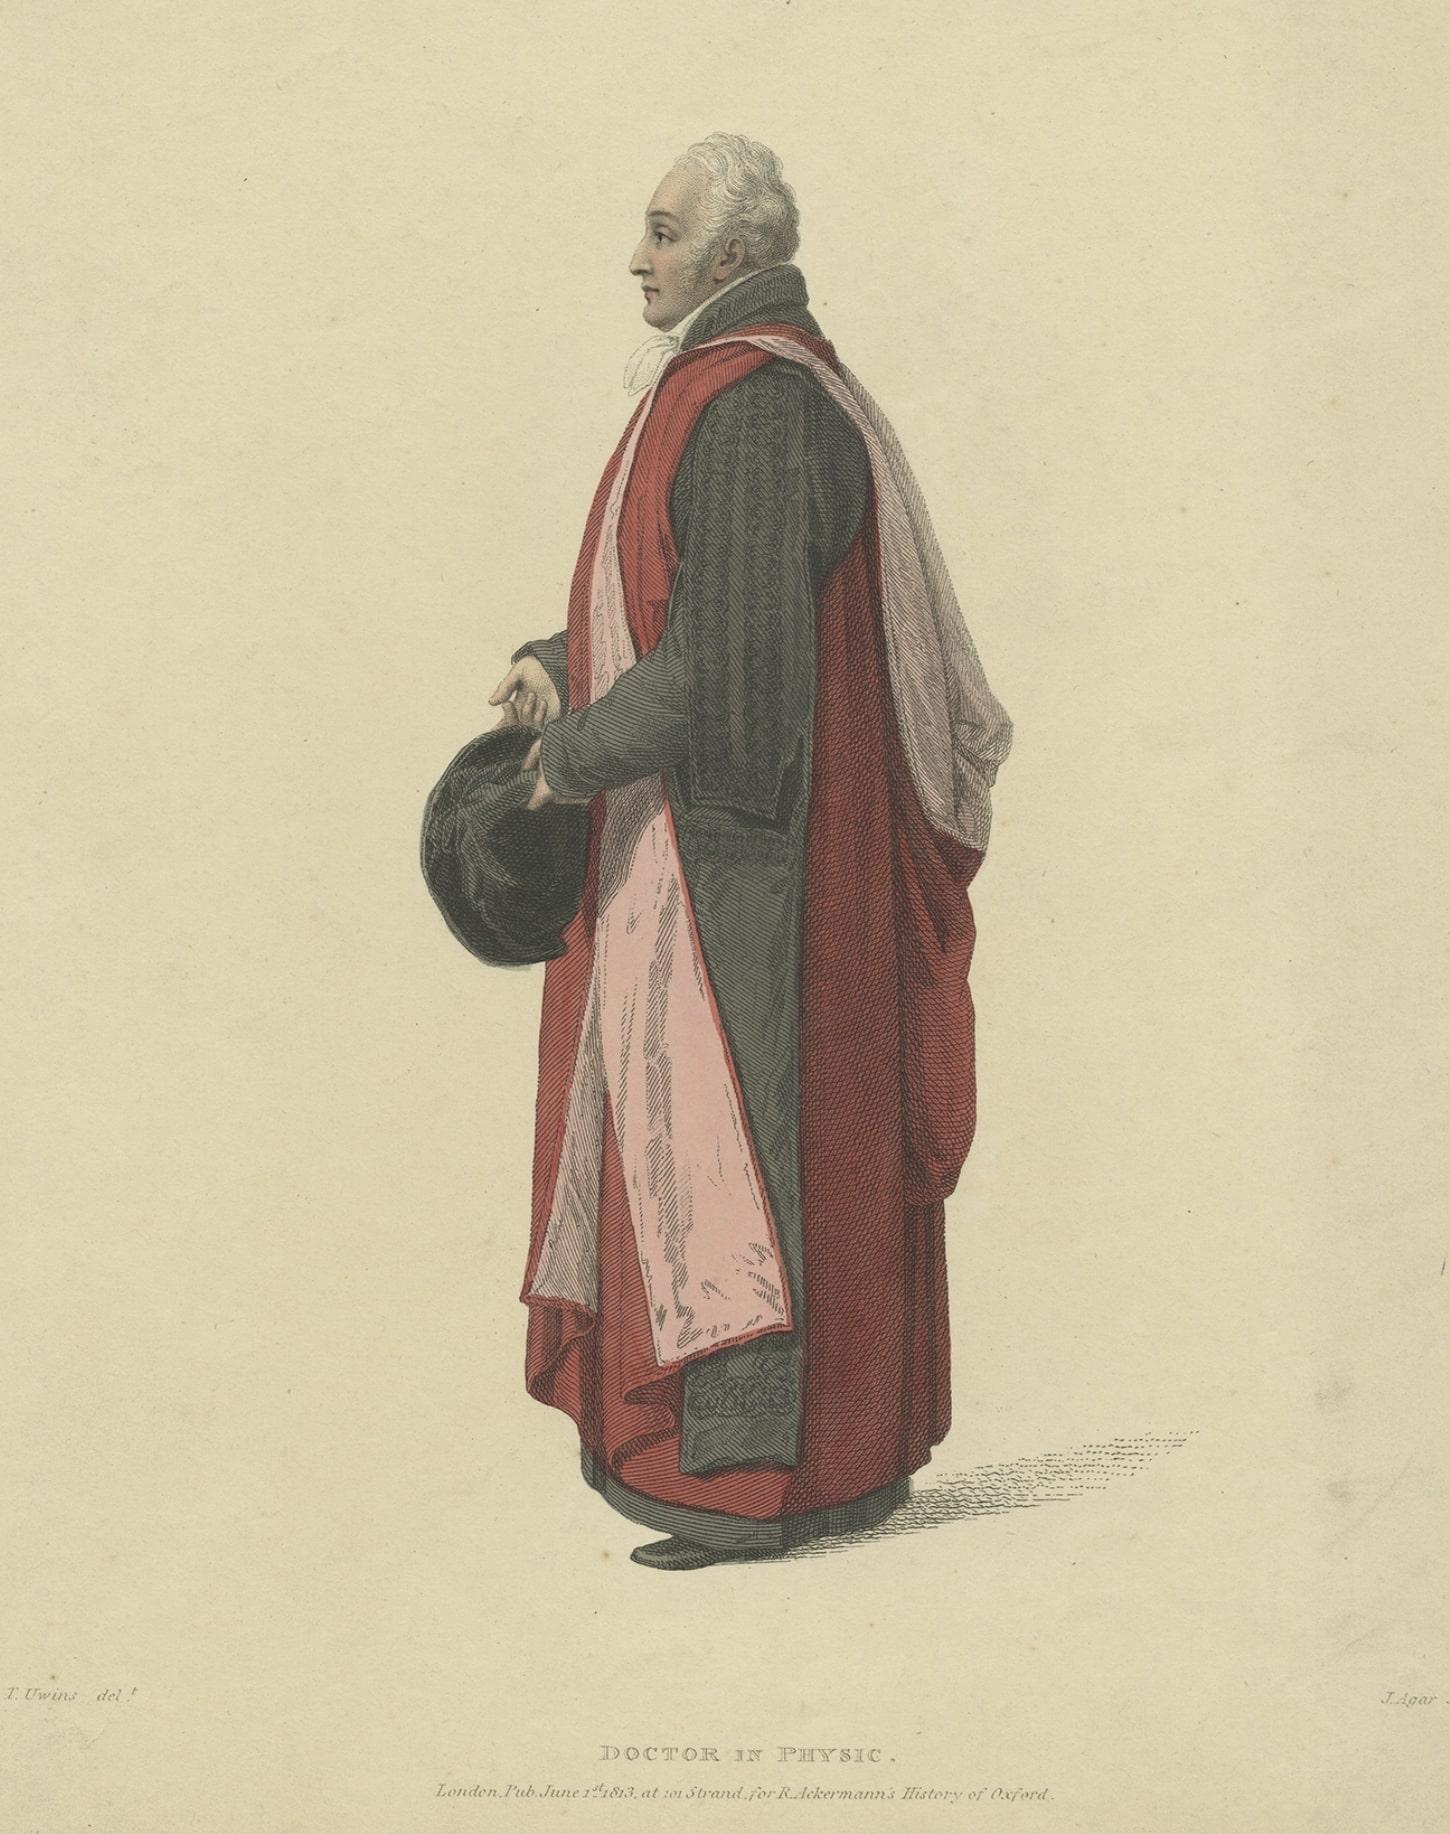 Antique print titled 'Doctor in Physic'. Portrait of Sir Christopher Pegge, in Convocation dress, made after a drawing by Thomas Uwins. This print originates from 'Ackermann's History of Oxford and History of Cambridge'. 

Artists and Engravers: